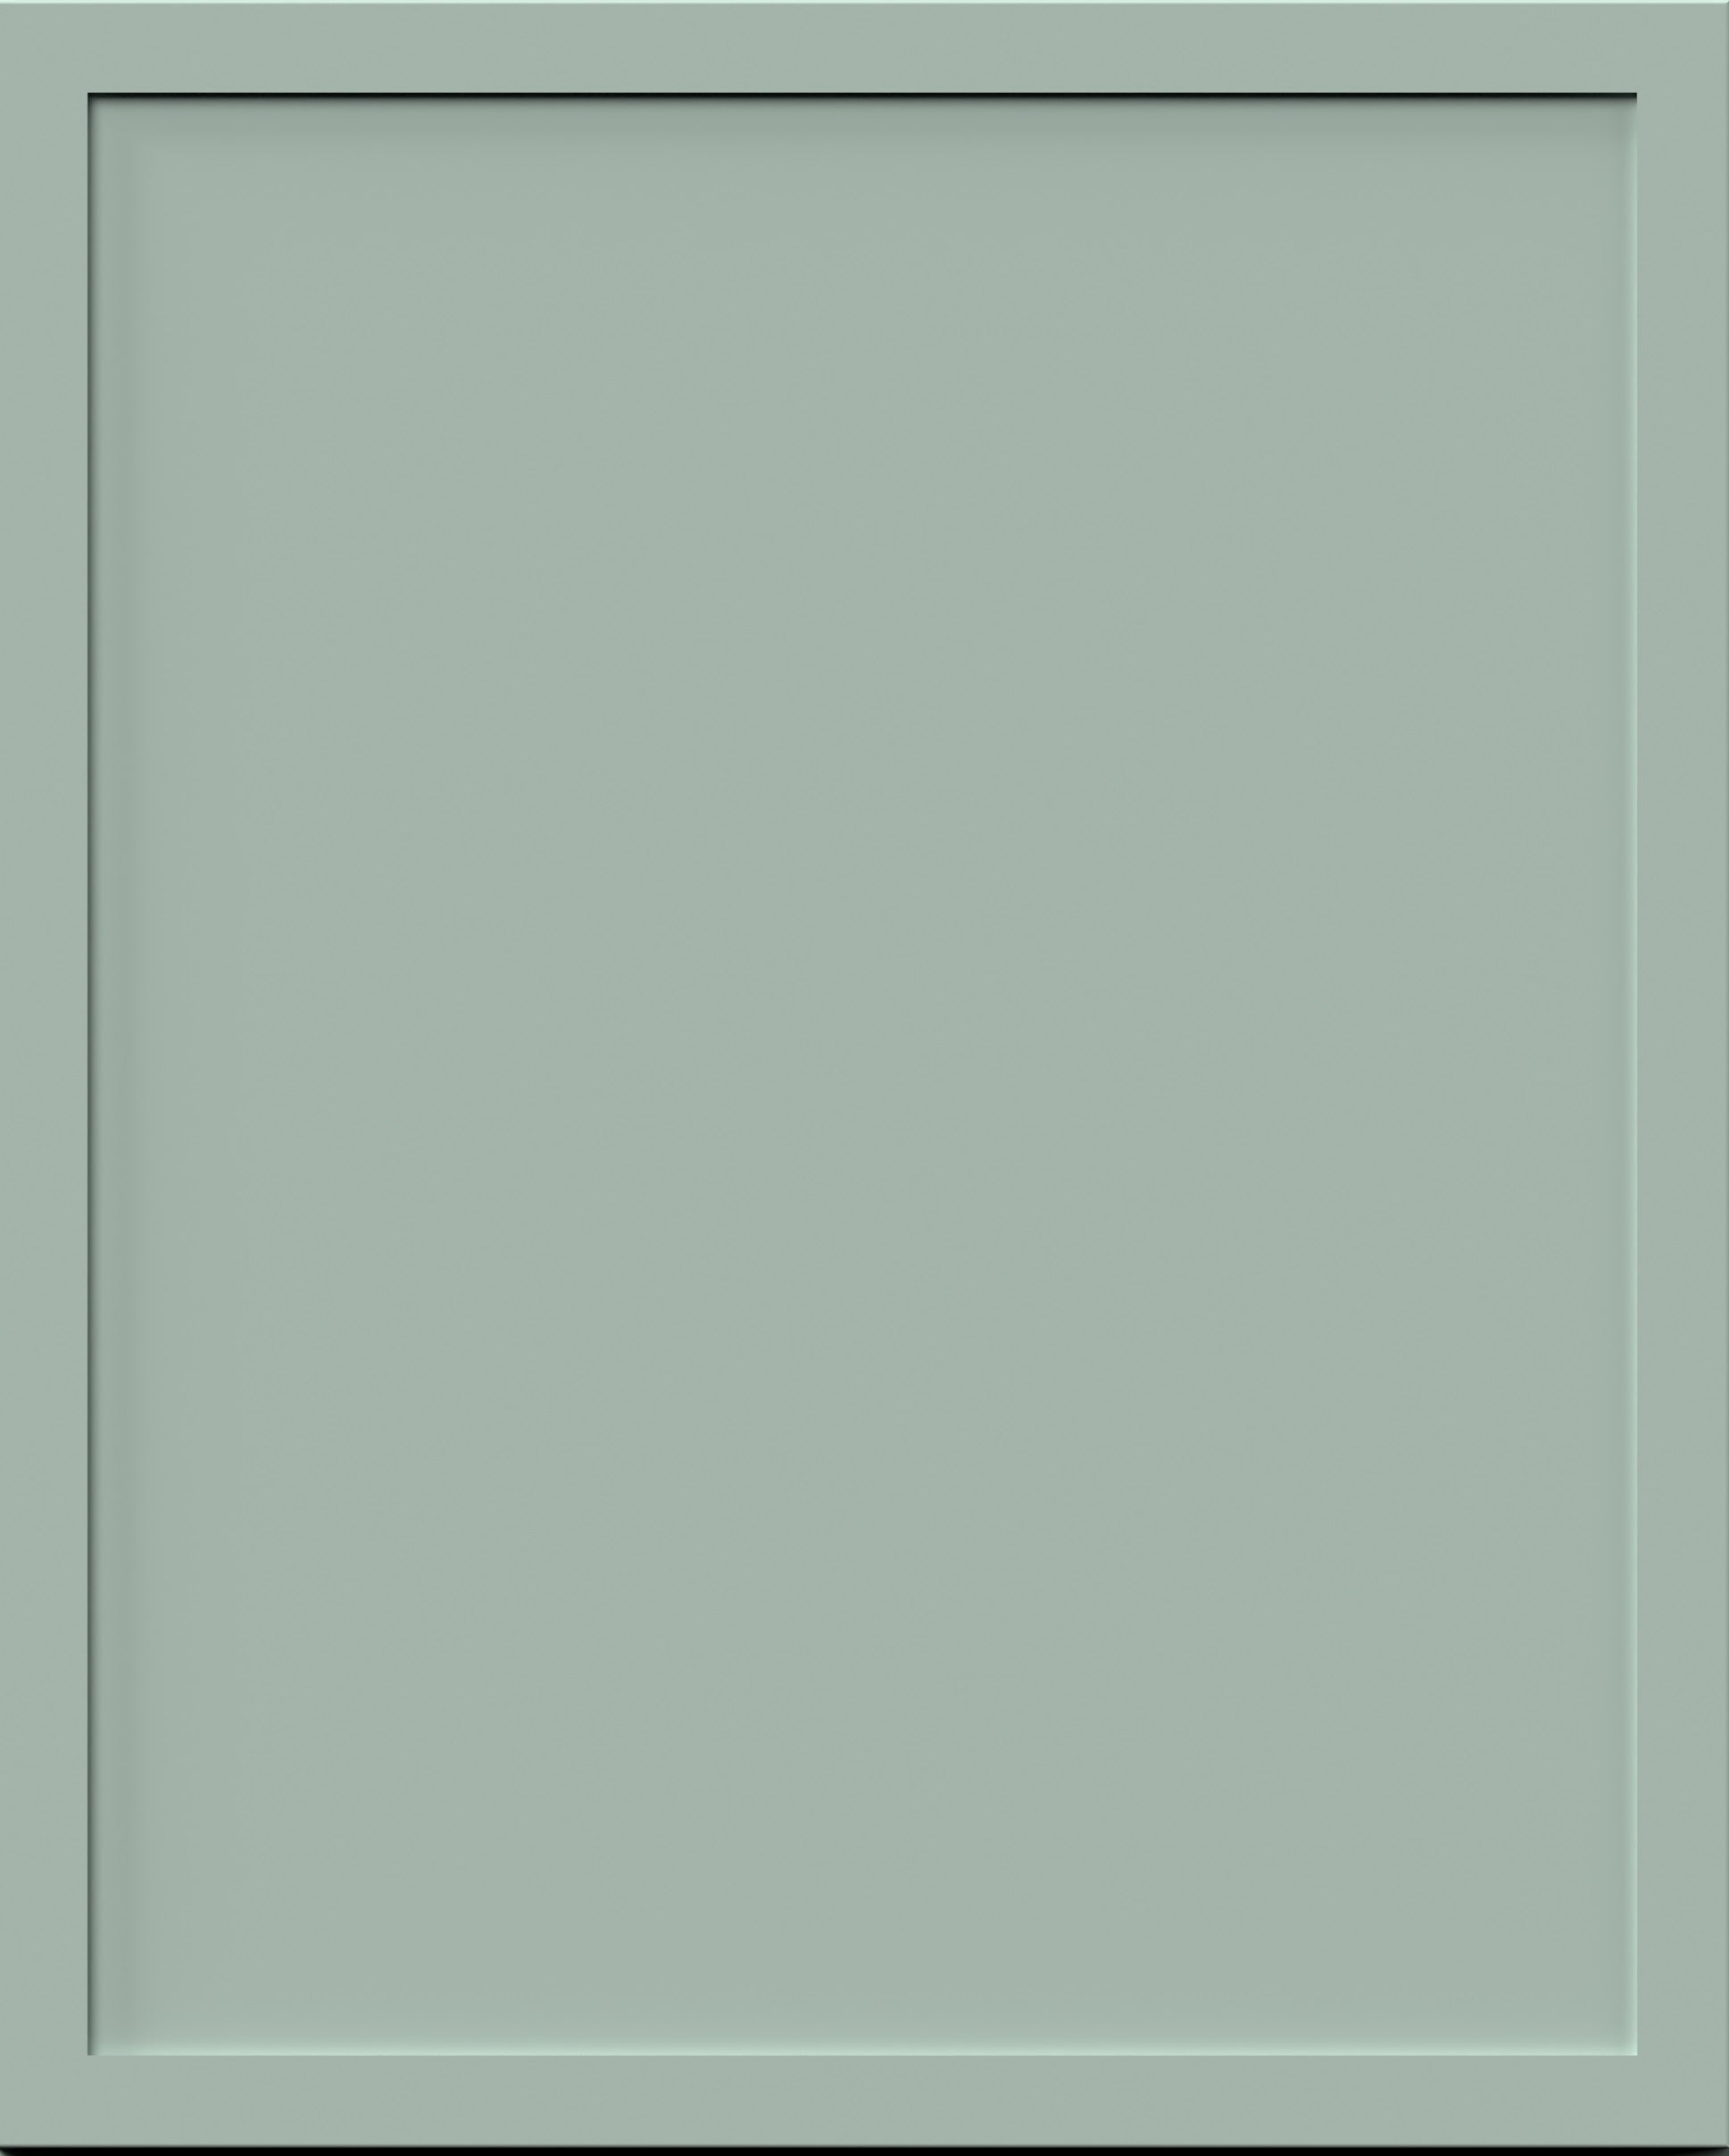 Fabuwood Luna sage green small sample door. Small shaker door style with a light, almost minty green painted finish.